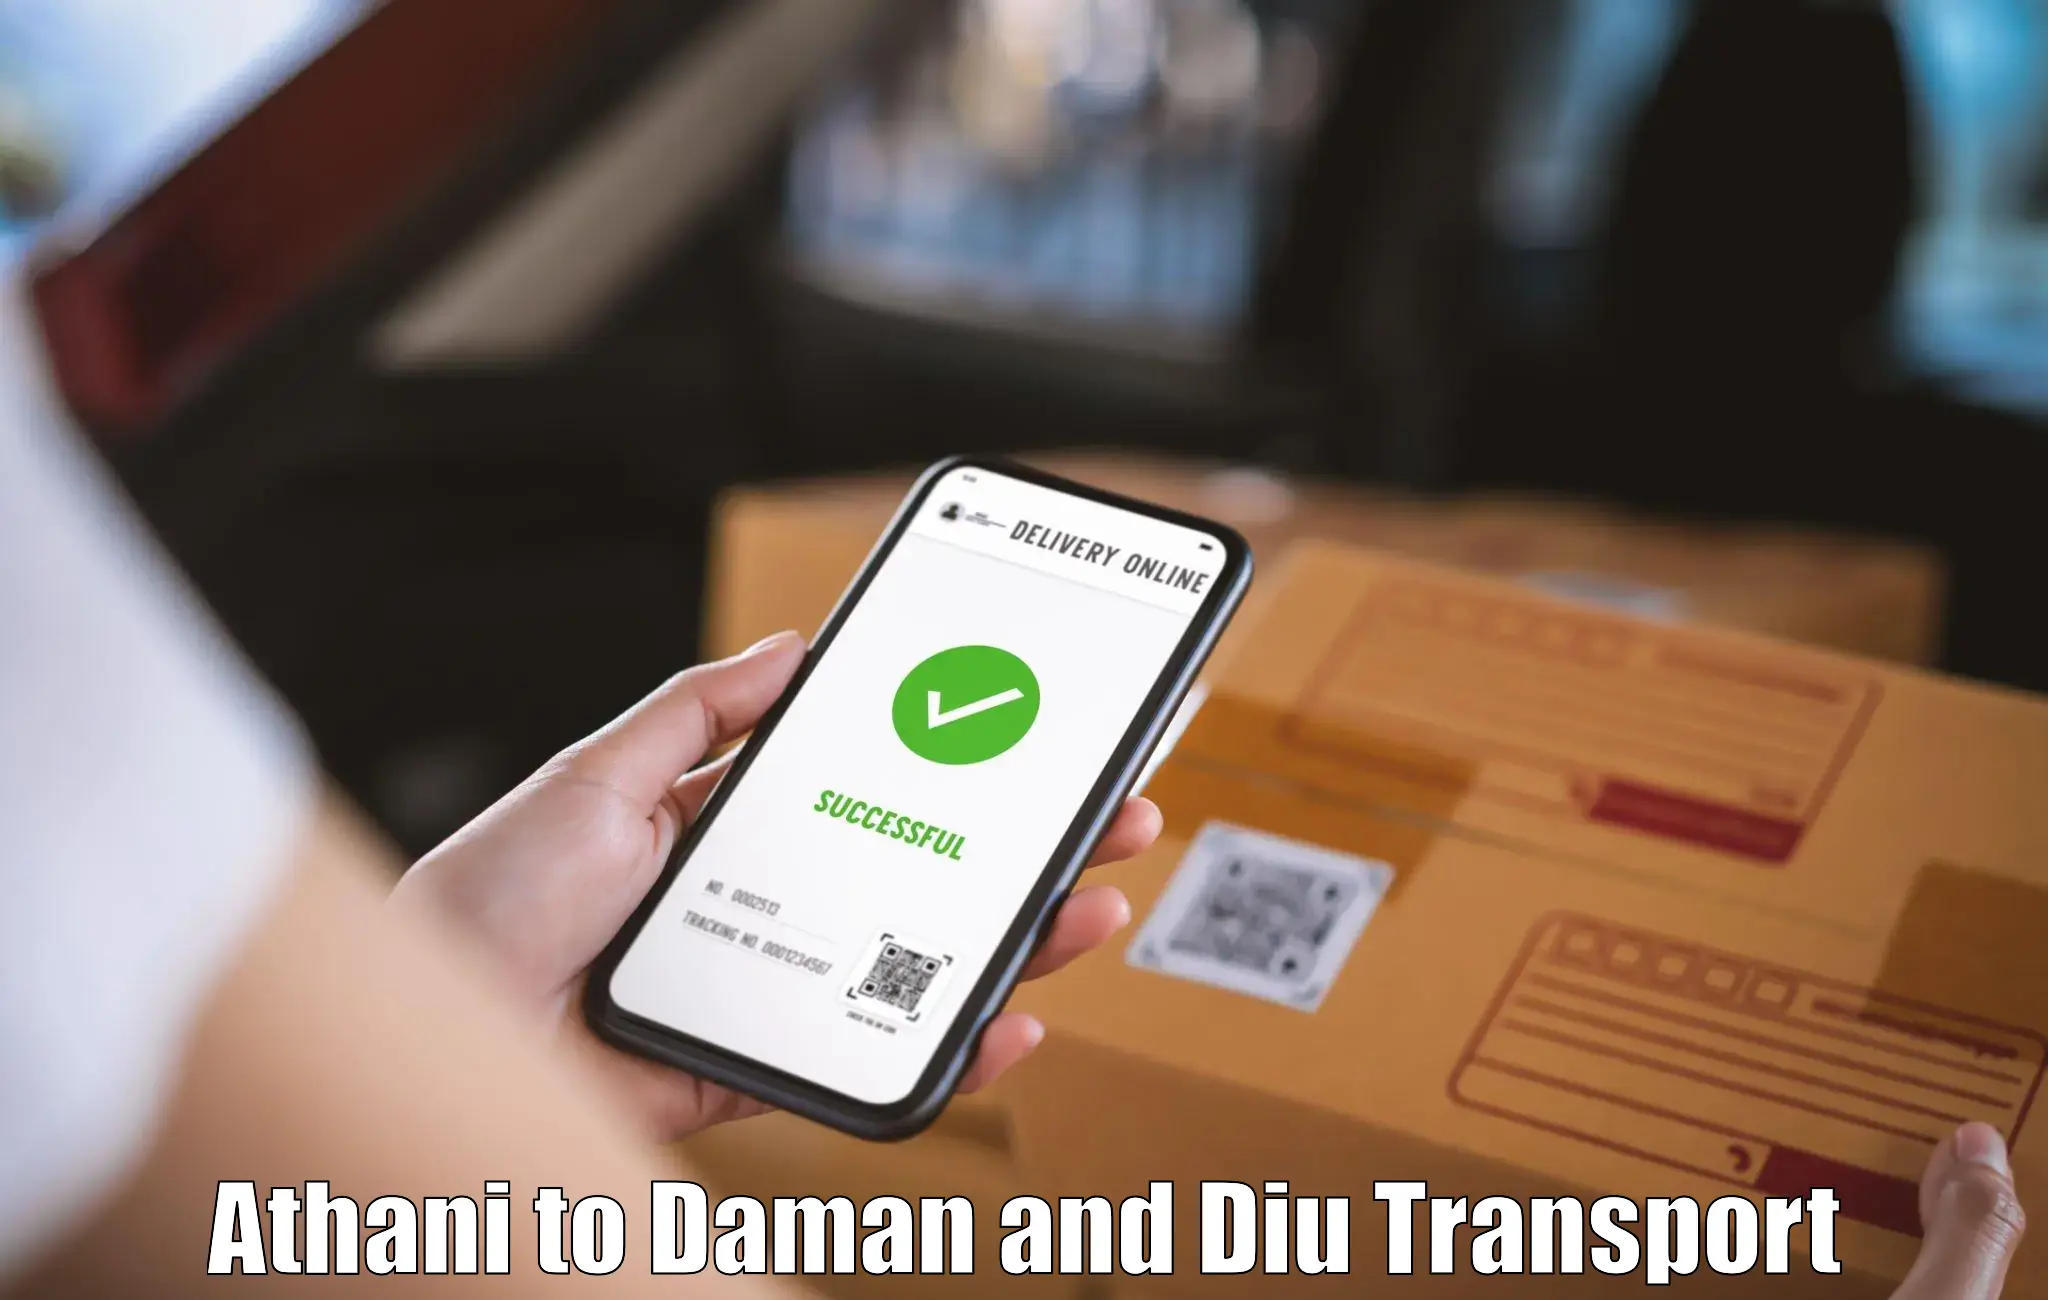 Goods delivery service Athani to Daman and Diu